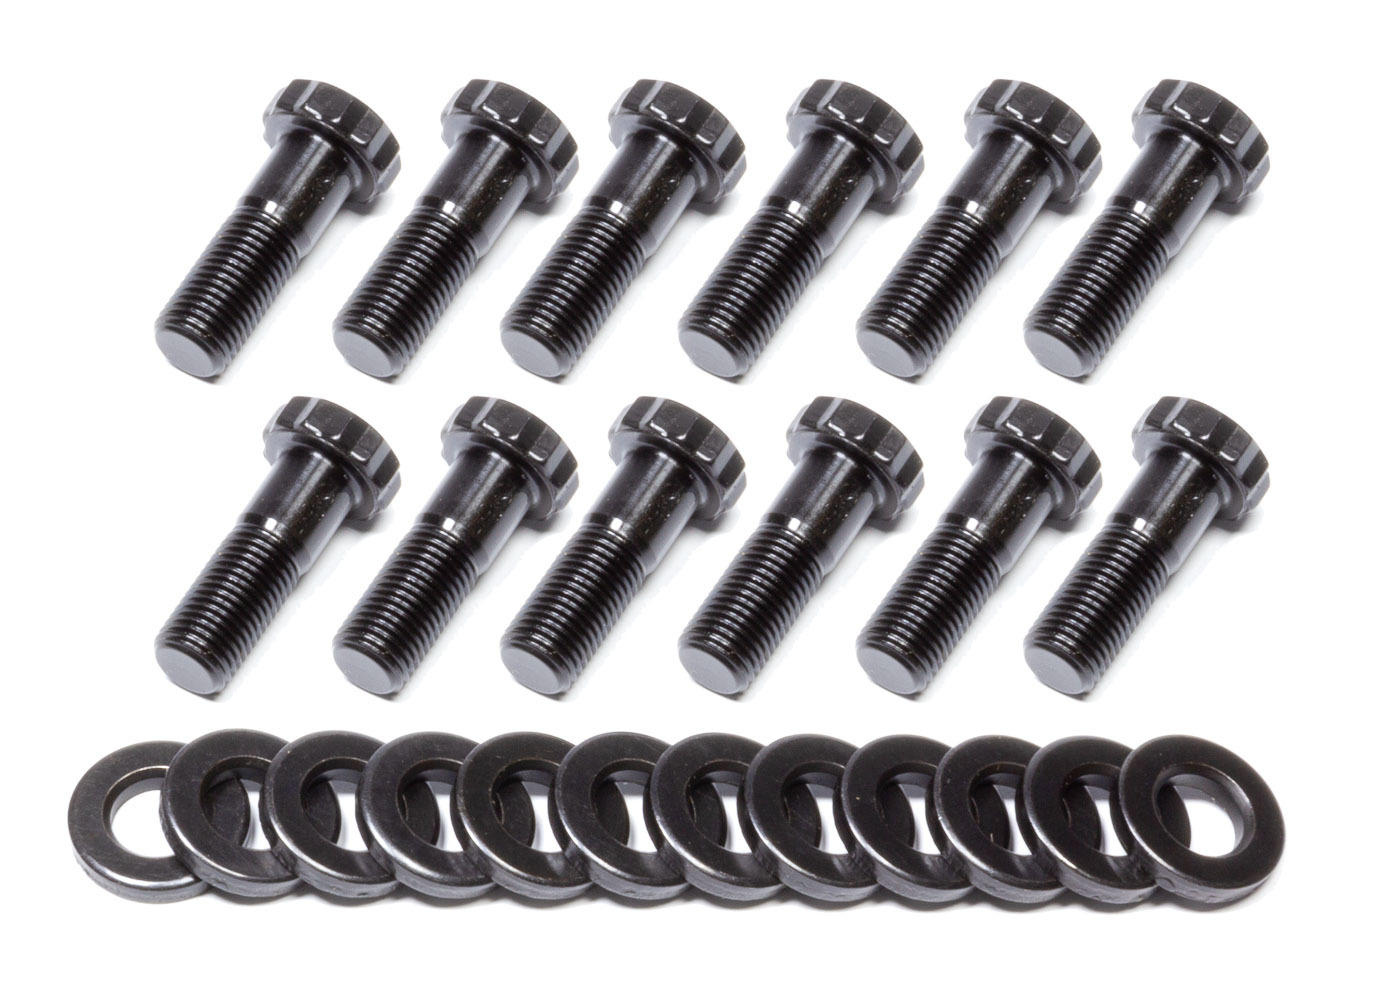 Tiger Quick Change 2055 Ring Gear Bolt Kit, 3/8-24 in Thread, 1.312 in Long, 12 Point Head, Chromoly, Black Oxide, Mopar 7-1/4 in and 8-3/4 in, Kit